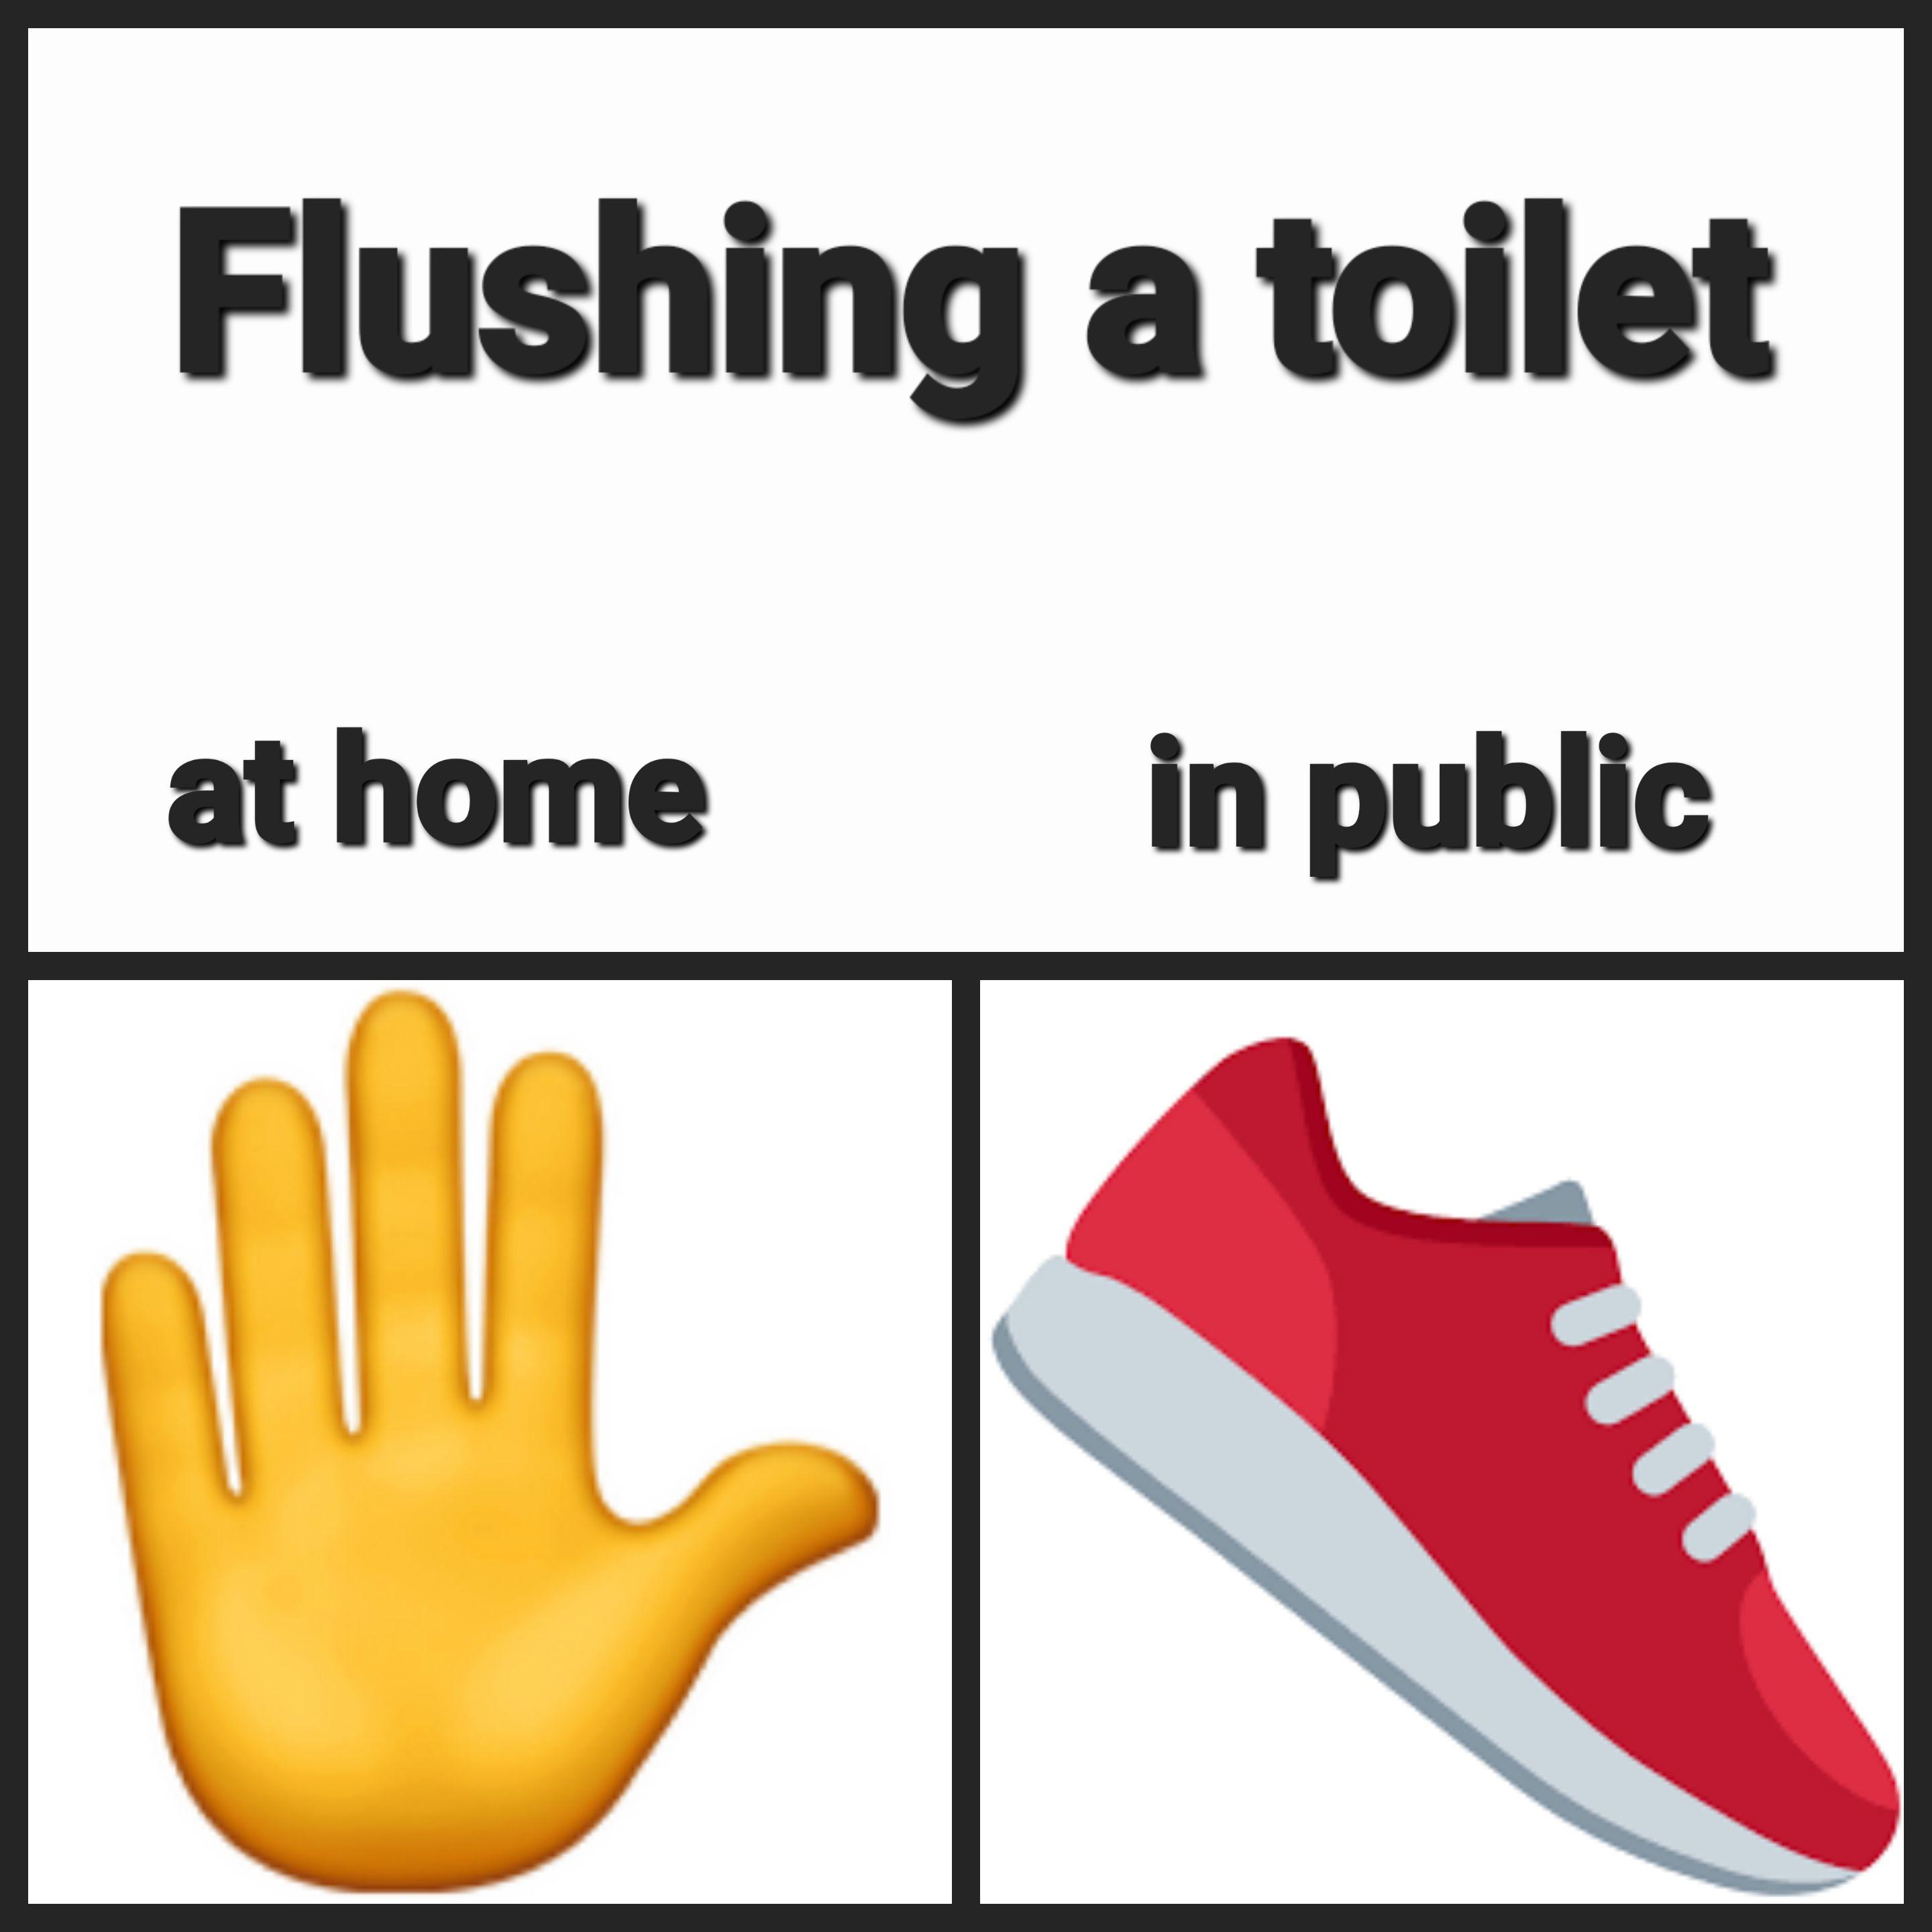 funny memes - dank memes - hand - Flushing a toilet at home in public